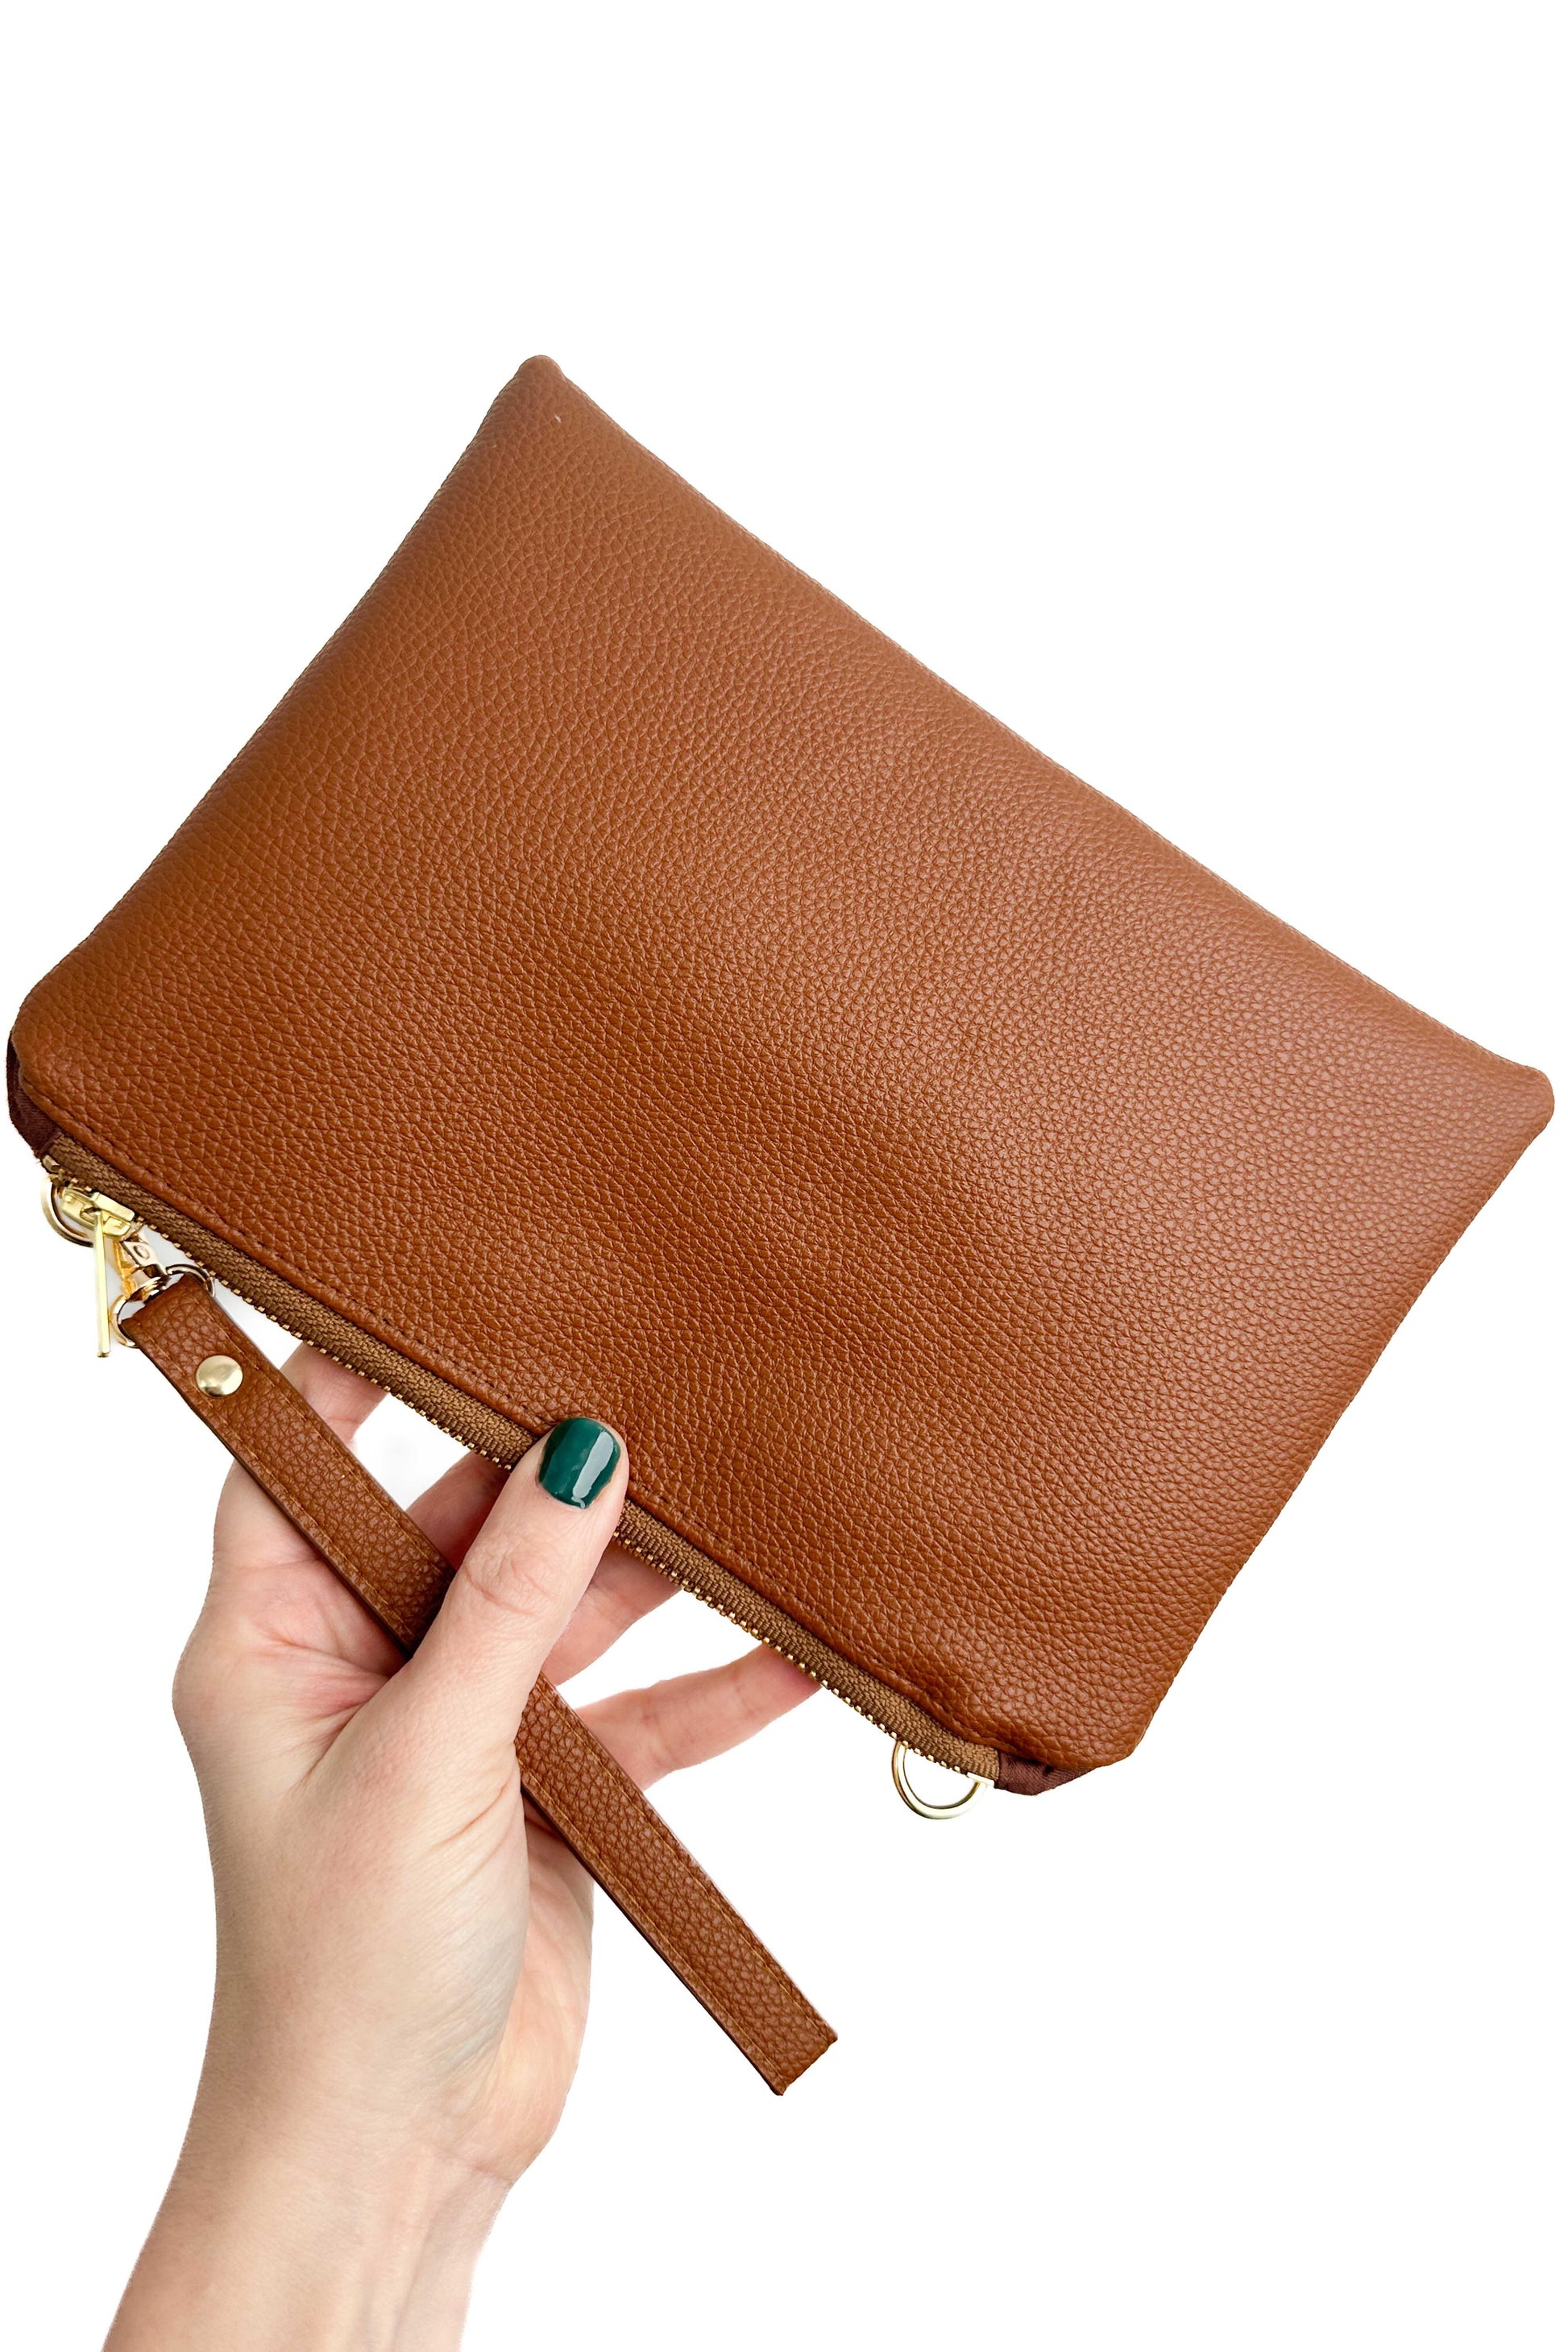 Classic Cognac Convertible Crossbody Wristlet+ with Compartments READY TO SHIP - Modern Makerie